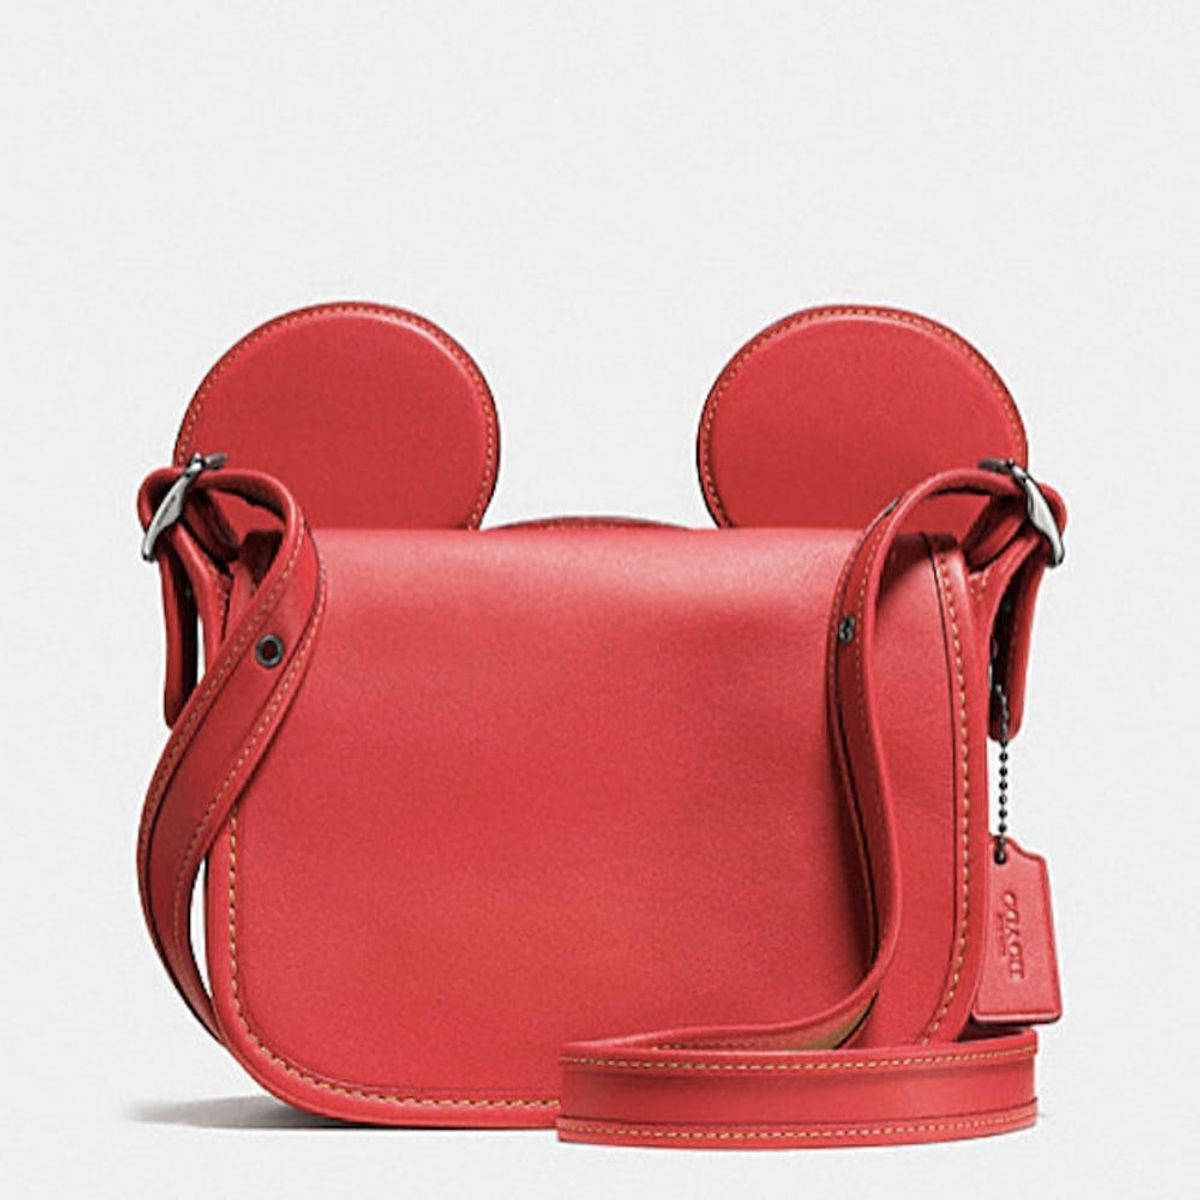 OMG: Coach Just Dropped ANOTHER Disney Collab at Half the Price of the Original